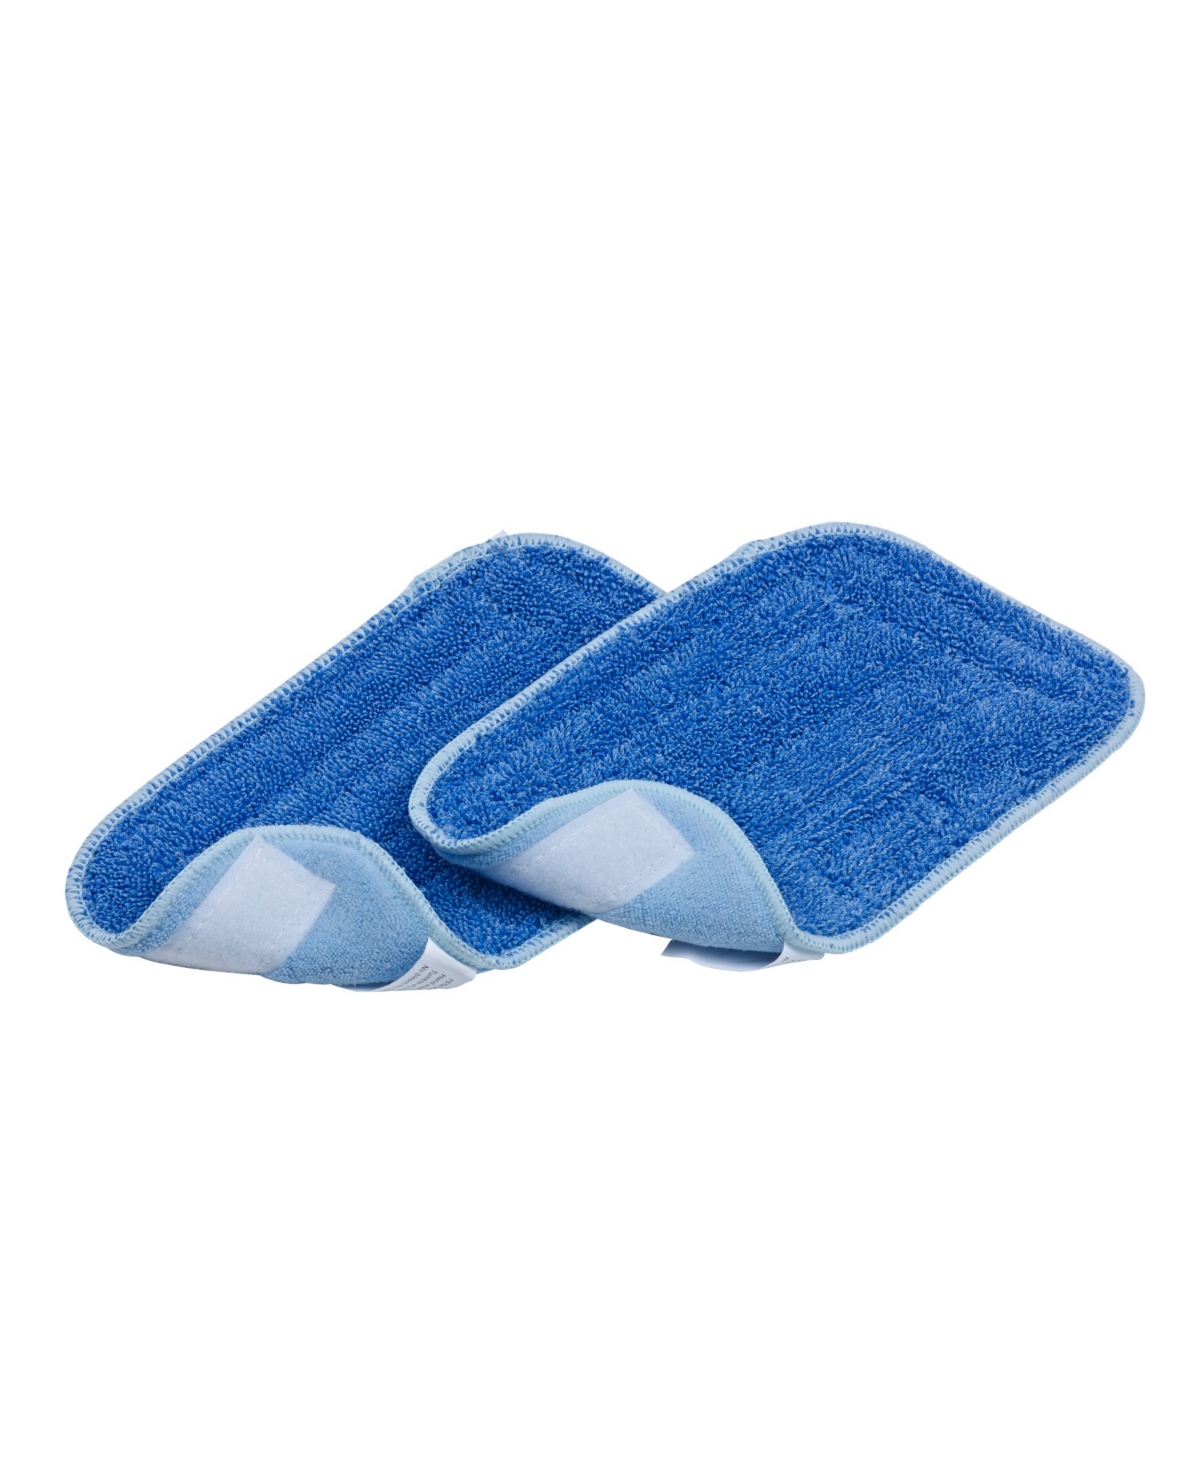 2-Pc. Mop Pad Replacement for Stm-403 Steam Mop - Blue